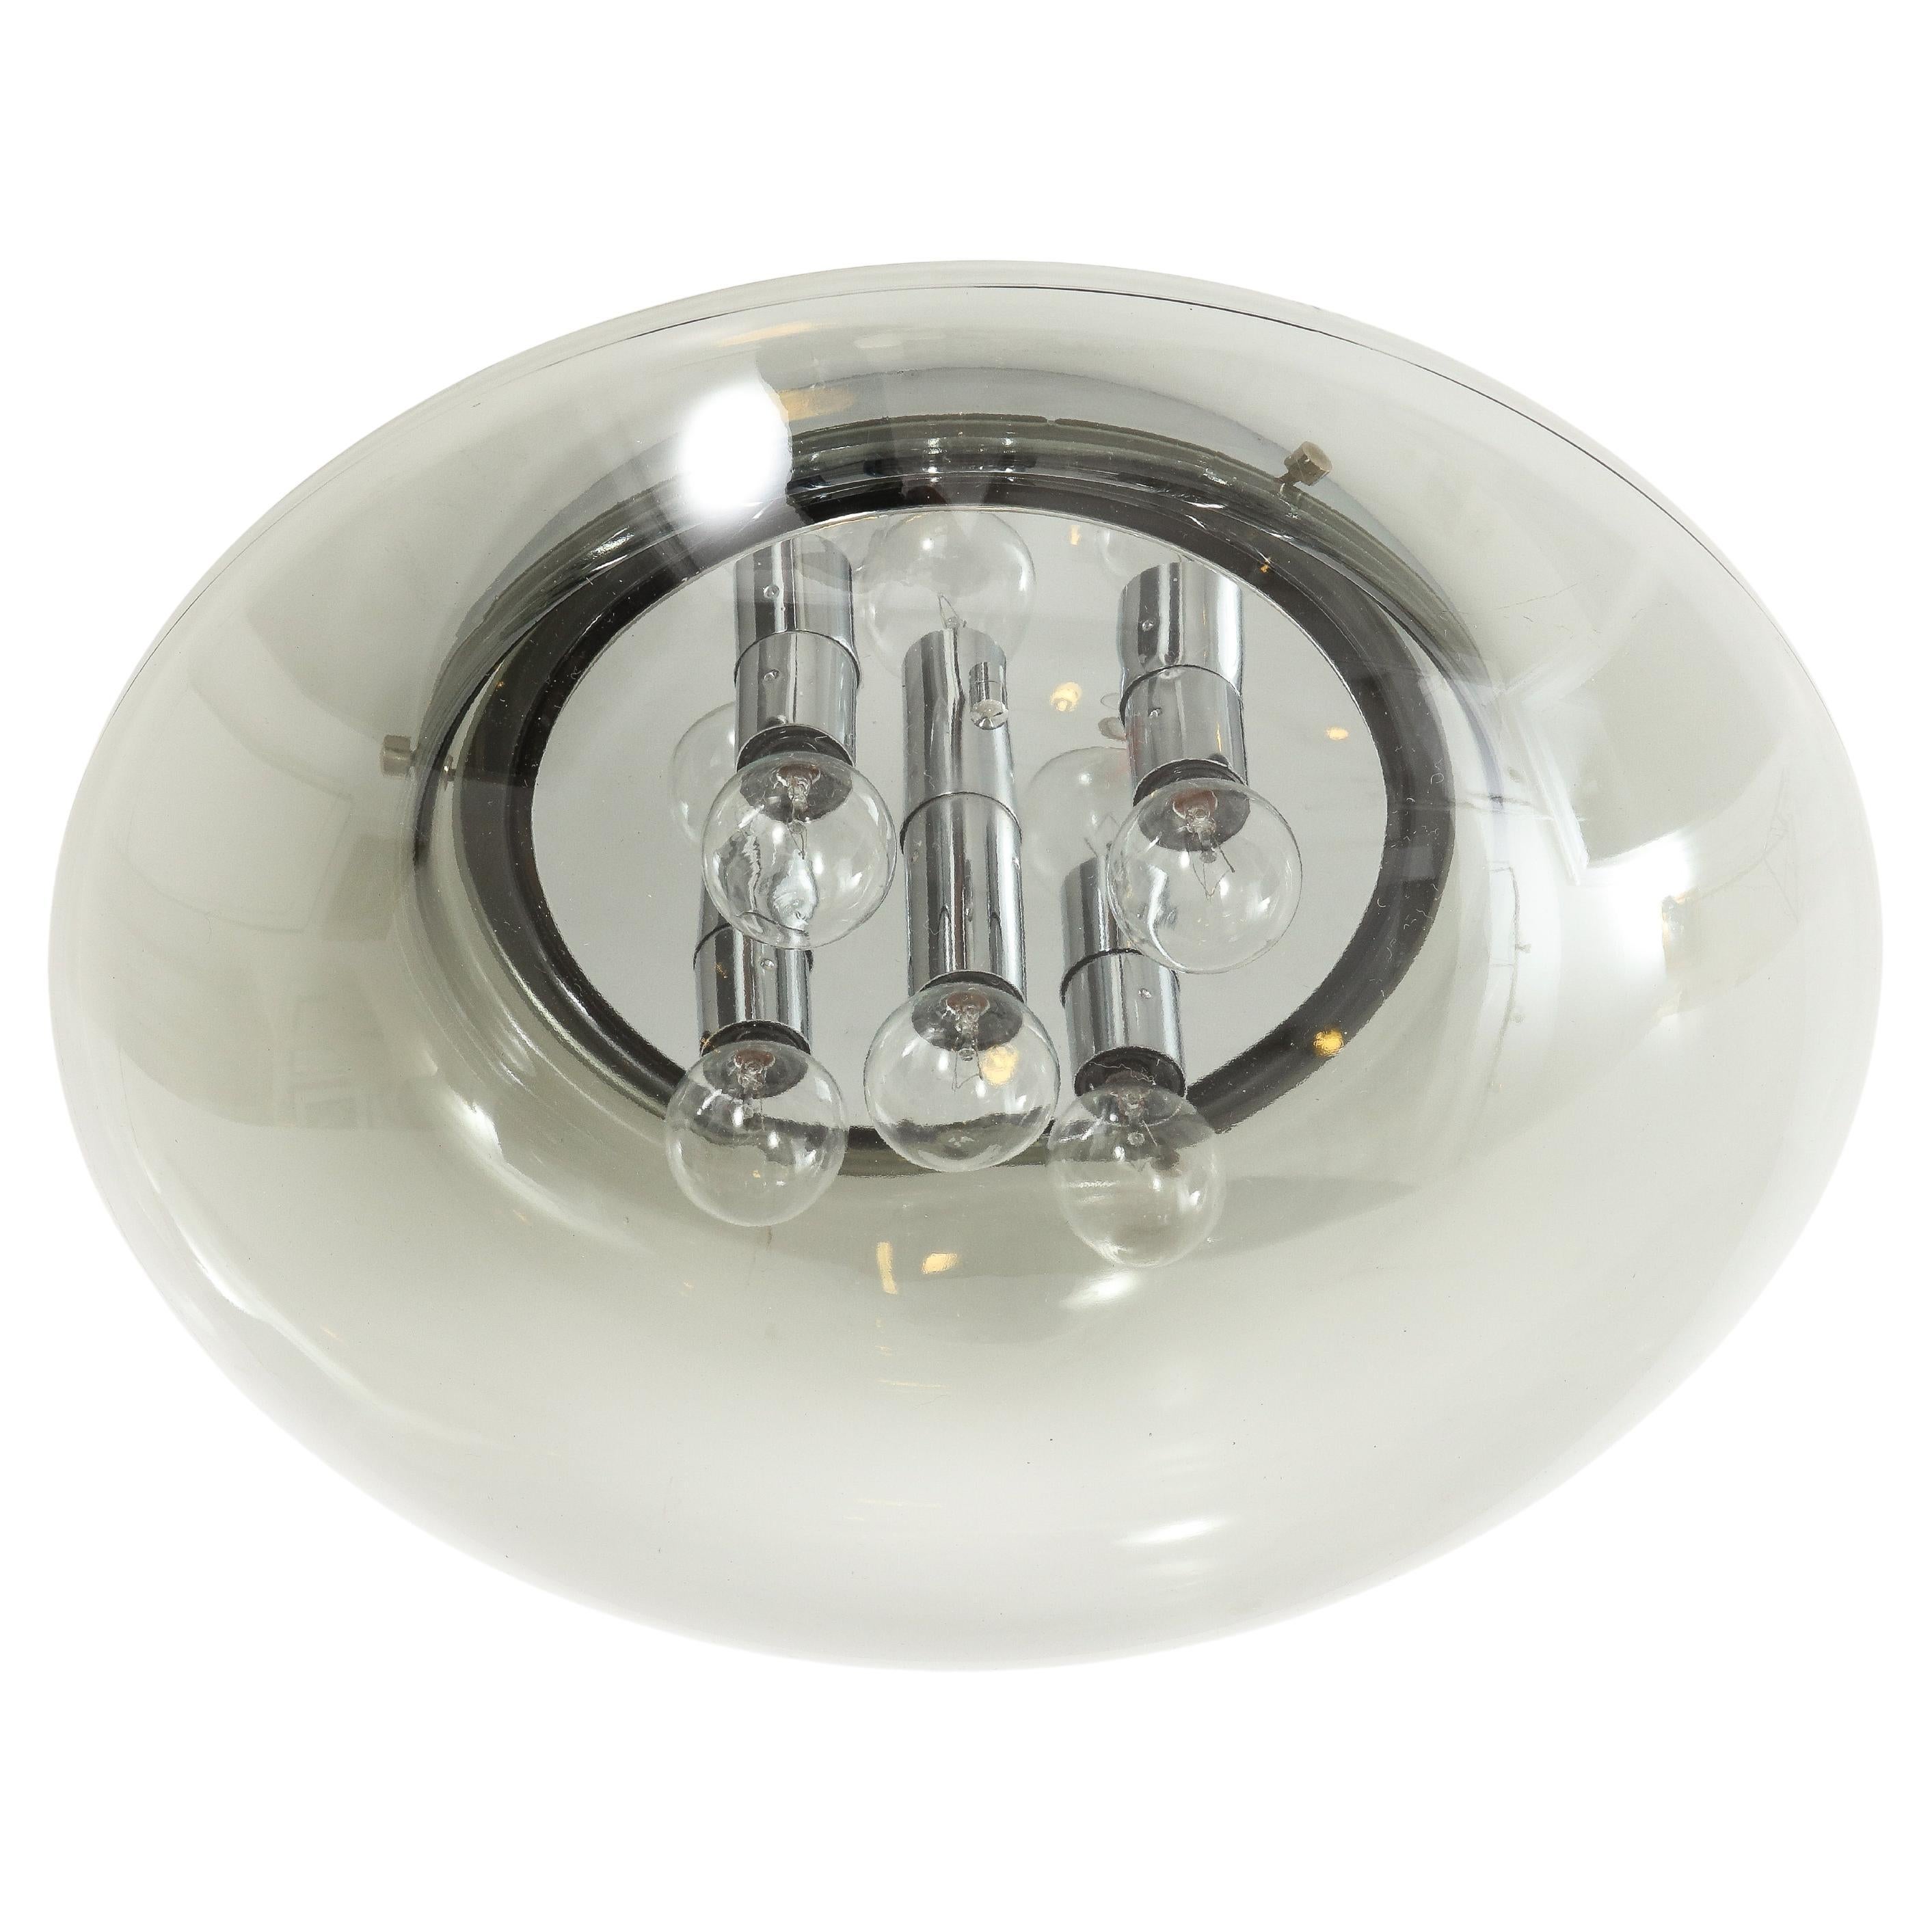 1970's Space Age smoked glass flush mount that can also be used
as a wall sconce.
The fixture has been Newly rewired and has 5 candelabra light sources.